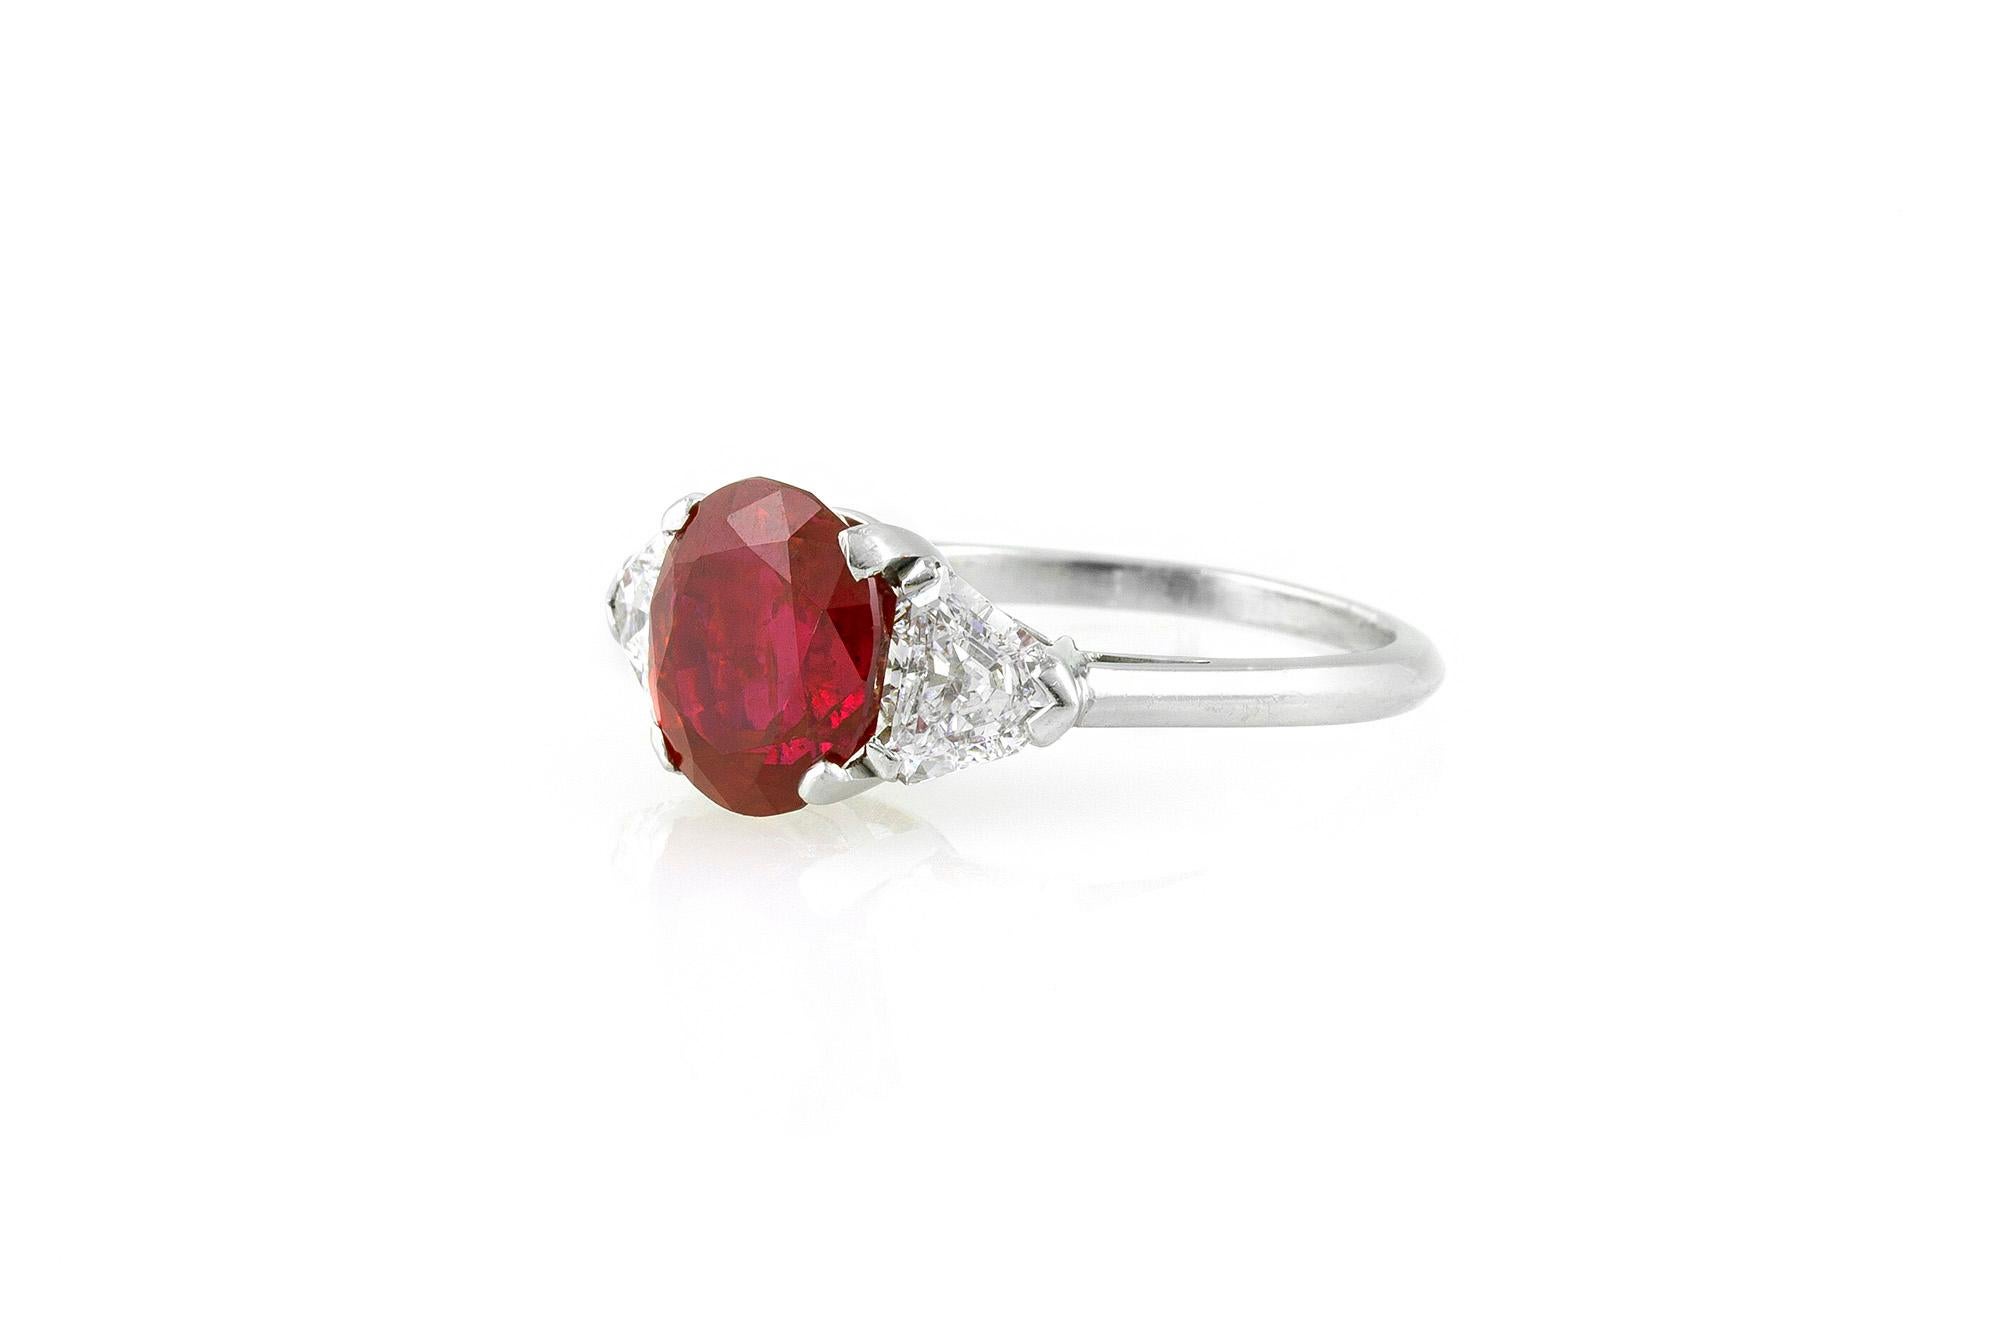 A beautiful ring, centering upon an oval-shaped ruby weighing 4.63 CT BURMA, NO HEAT. The center stone is flanked on either side by diamonds weighing 0.70 CT mounted in platinum signed R. Yard.
Accompanied by reports from AGL and GIA.